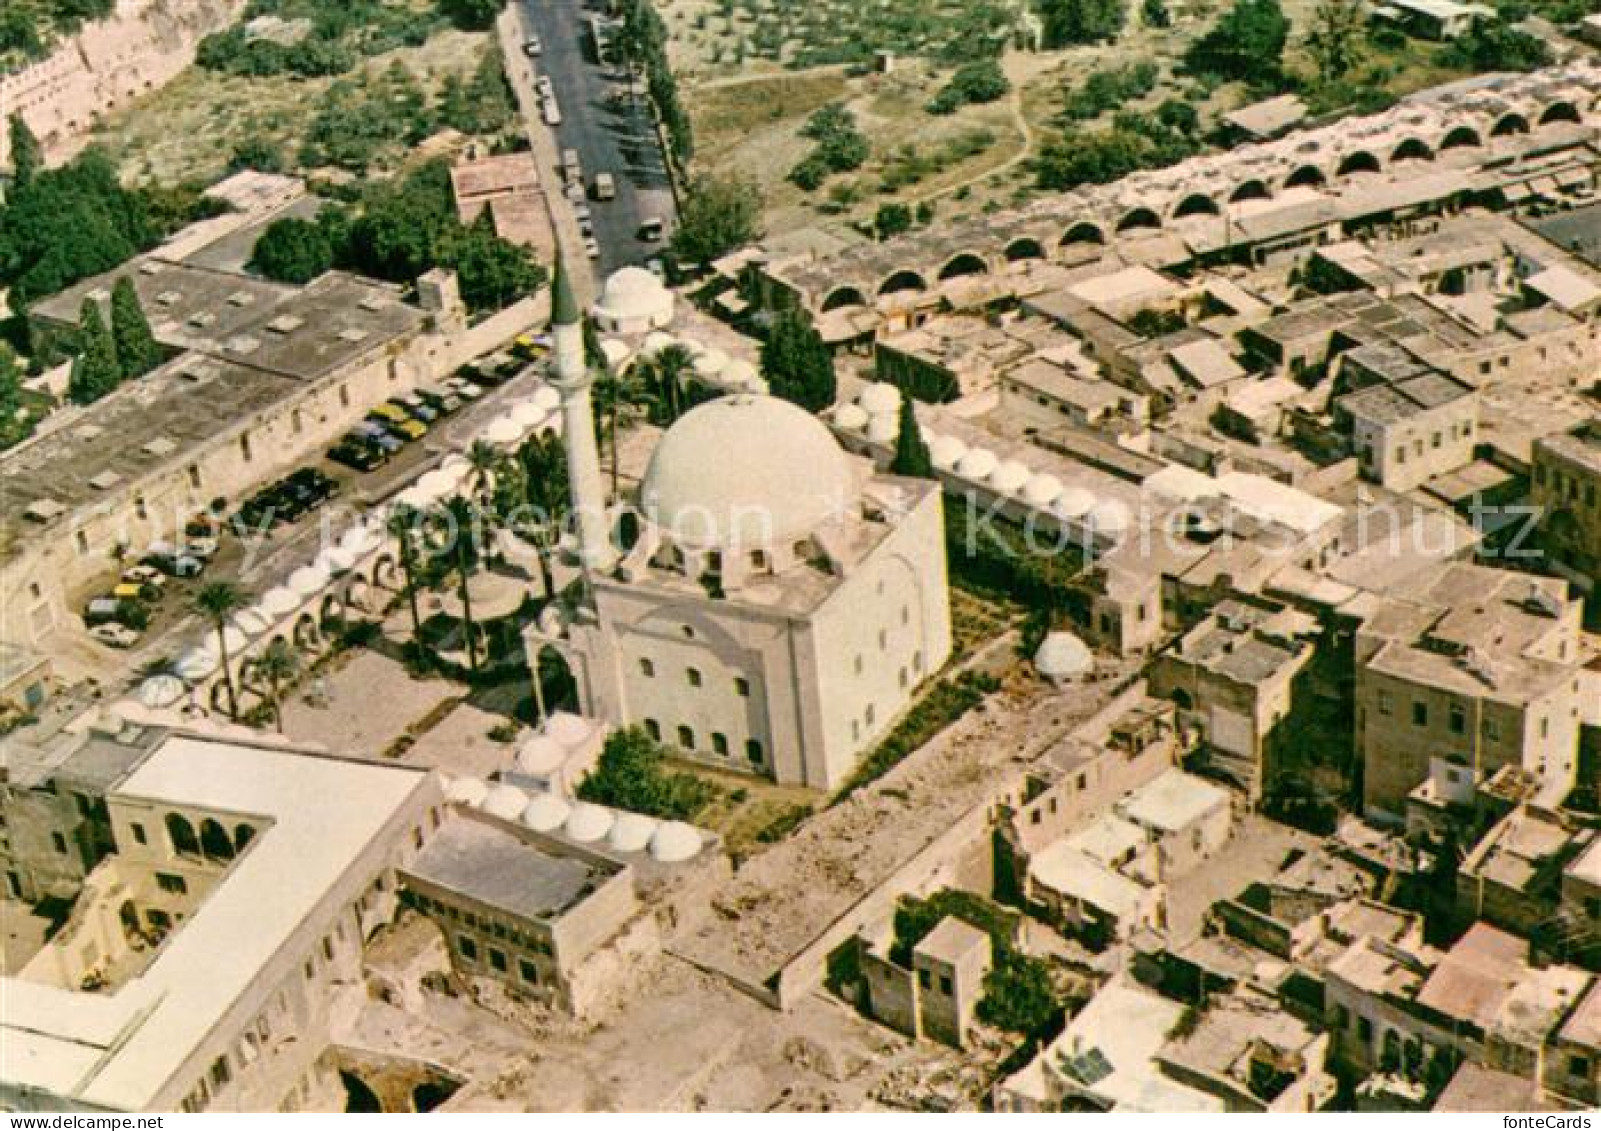 73661562 Acre Partial View From The Air Centre El Jazzars Mosque Acre - Israel